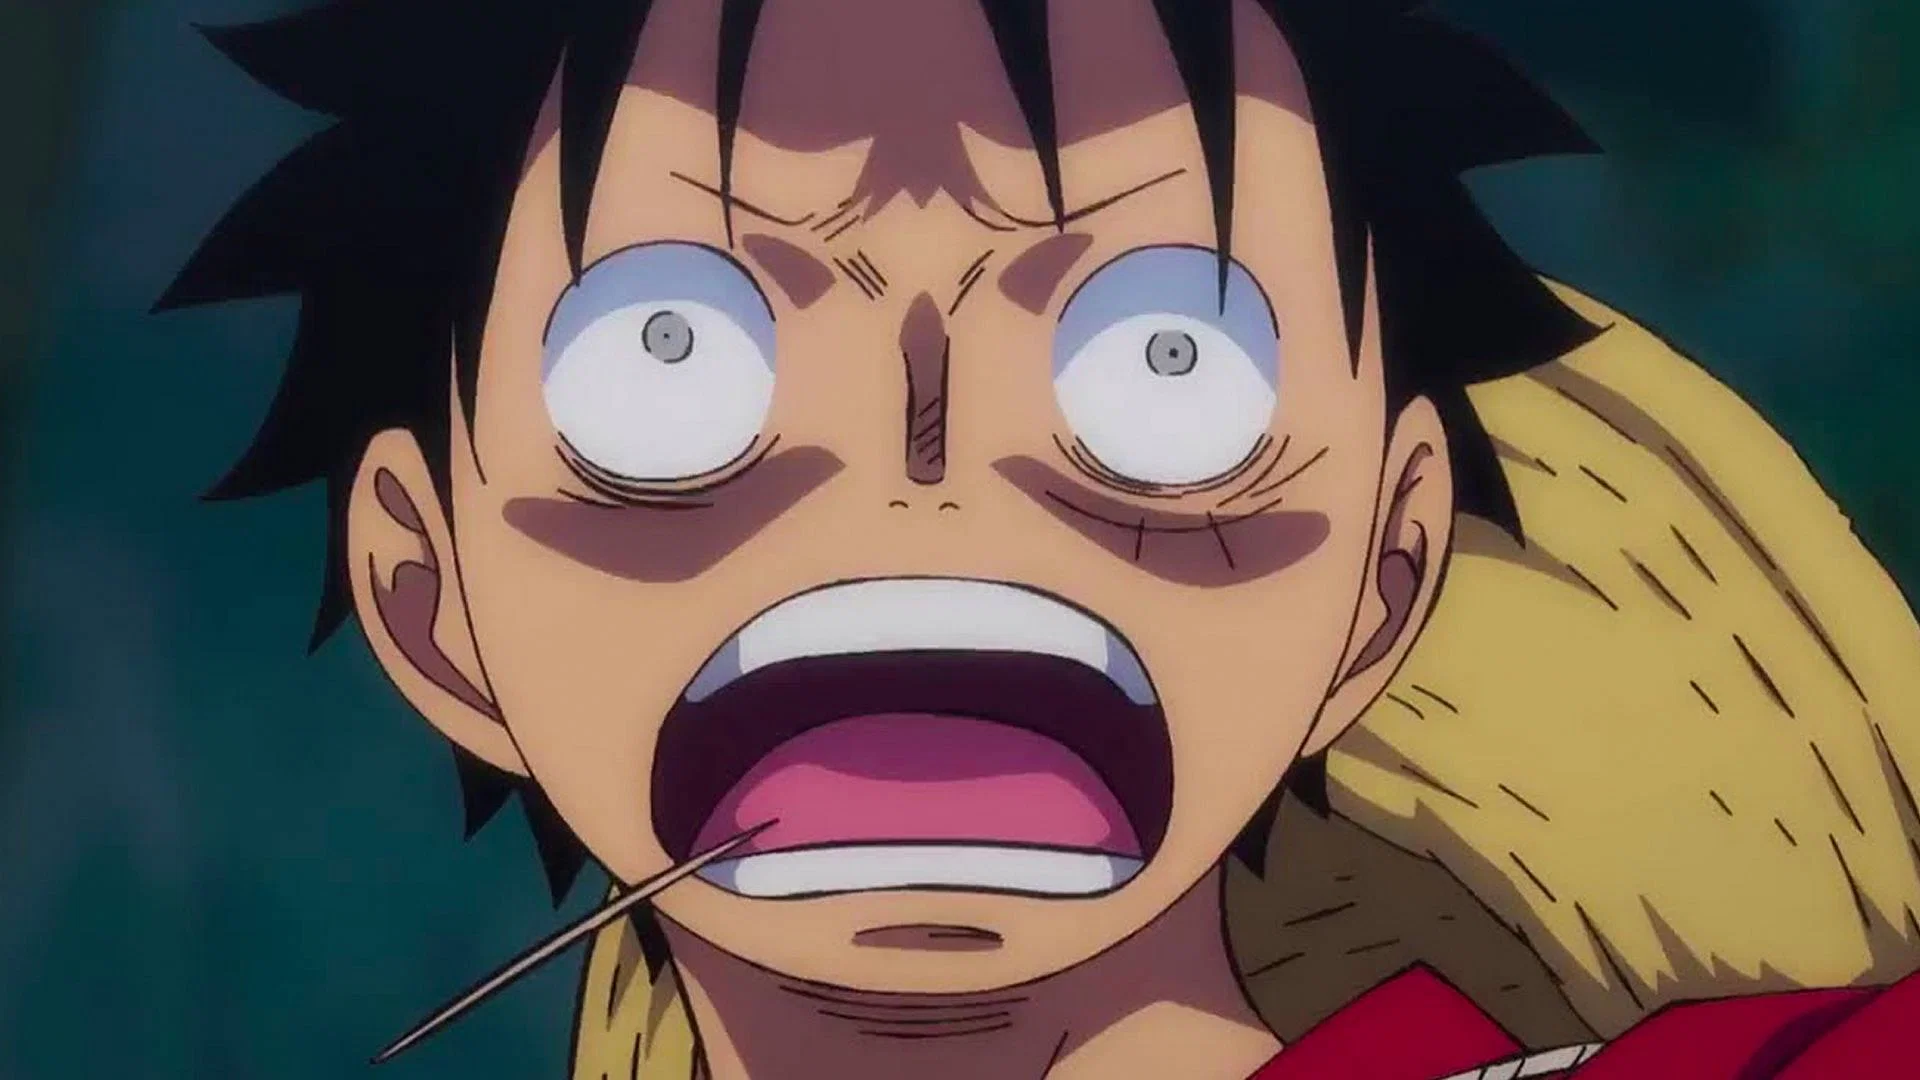 Kagurabachi and One Piece fans Get in a Heated Argument Over a Silly Thing